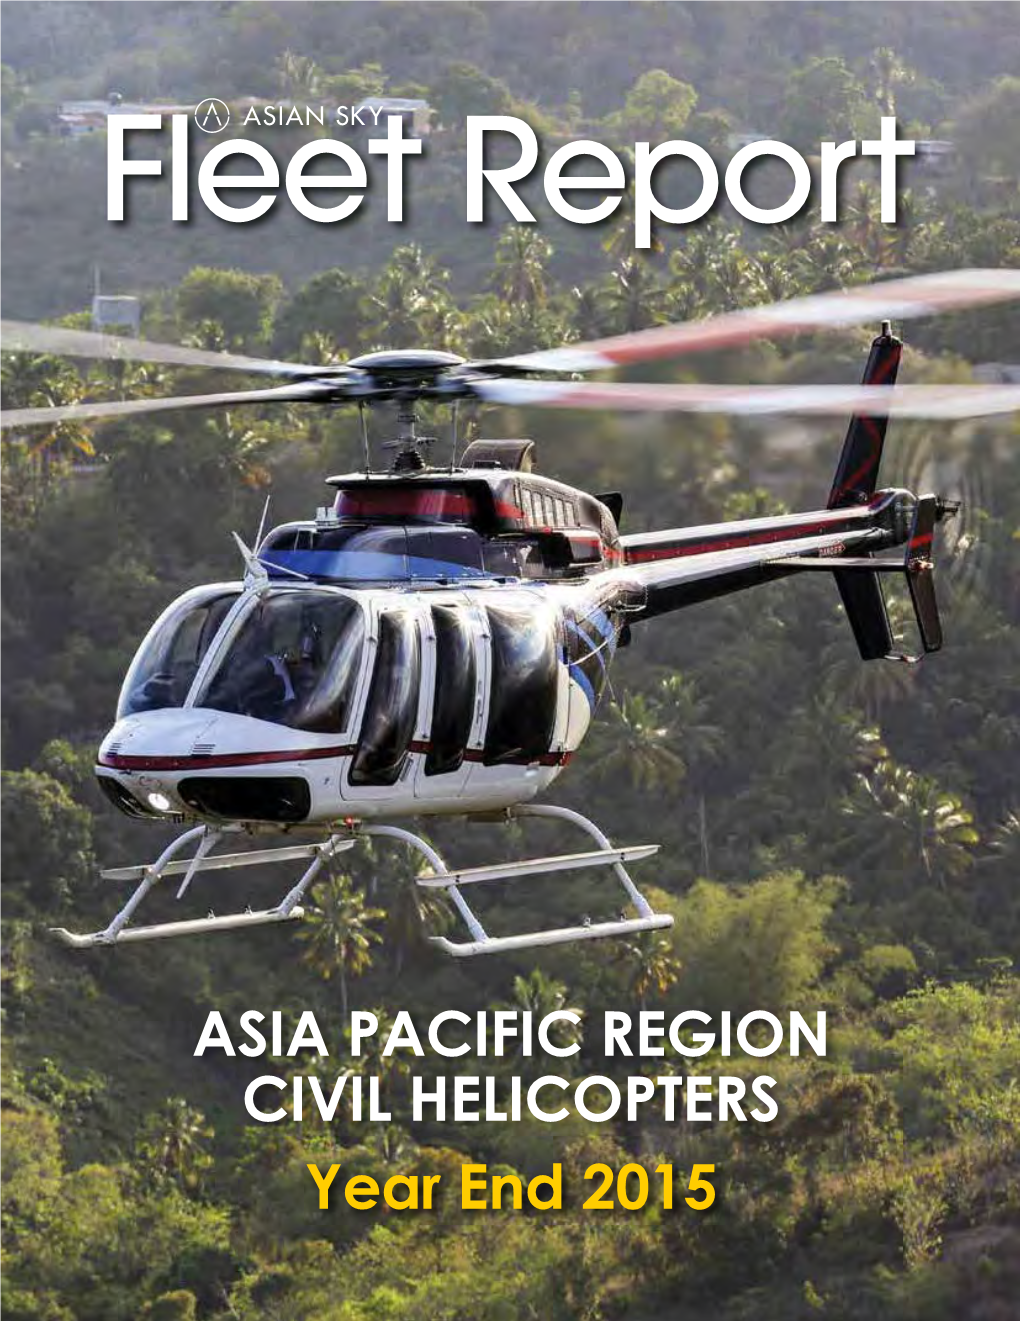 ASIA PACIFIC REGION CIVIL HELICOPTERS Year End 2015 Beijing Seoul Penglai